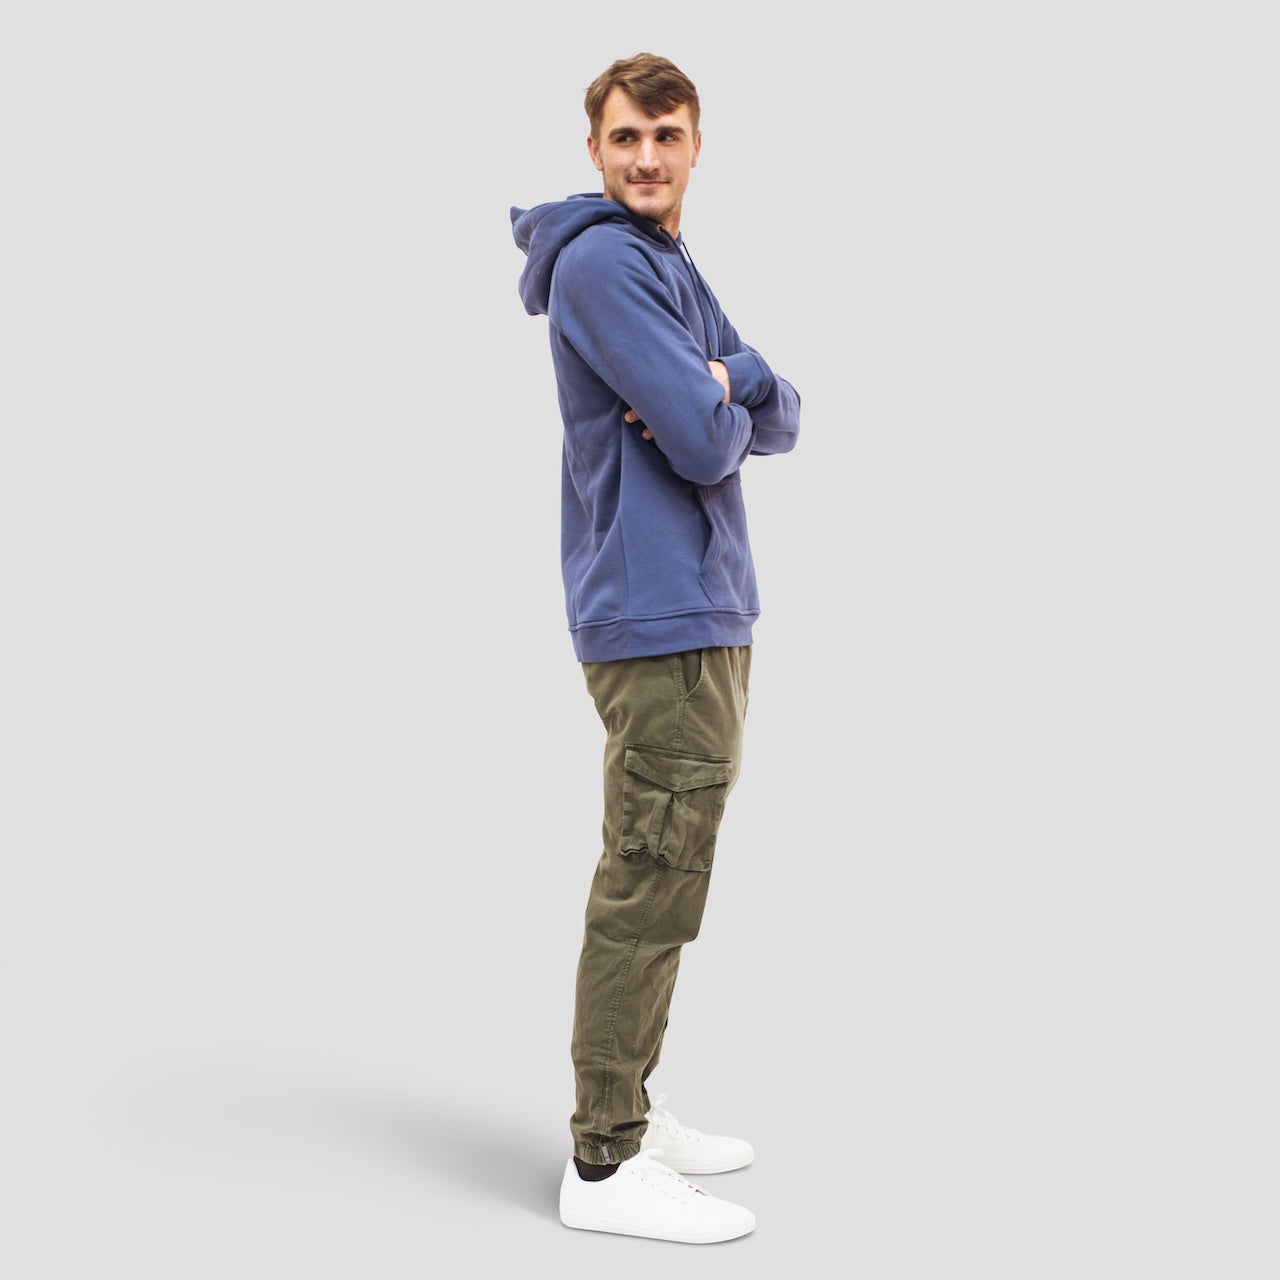 Blue Pullover Hodie for Tall Slim Men